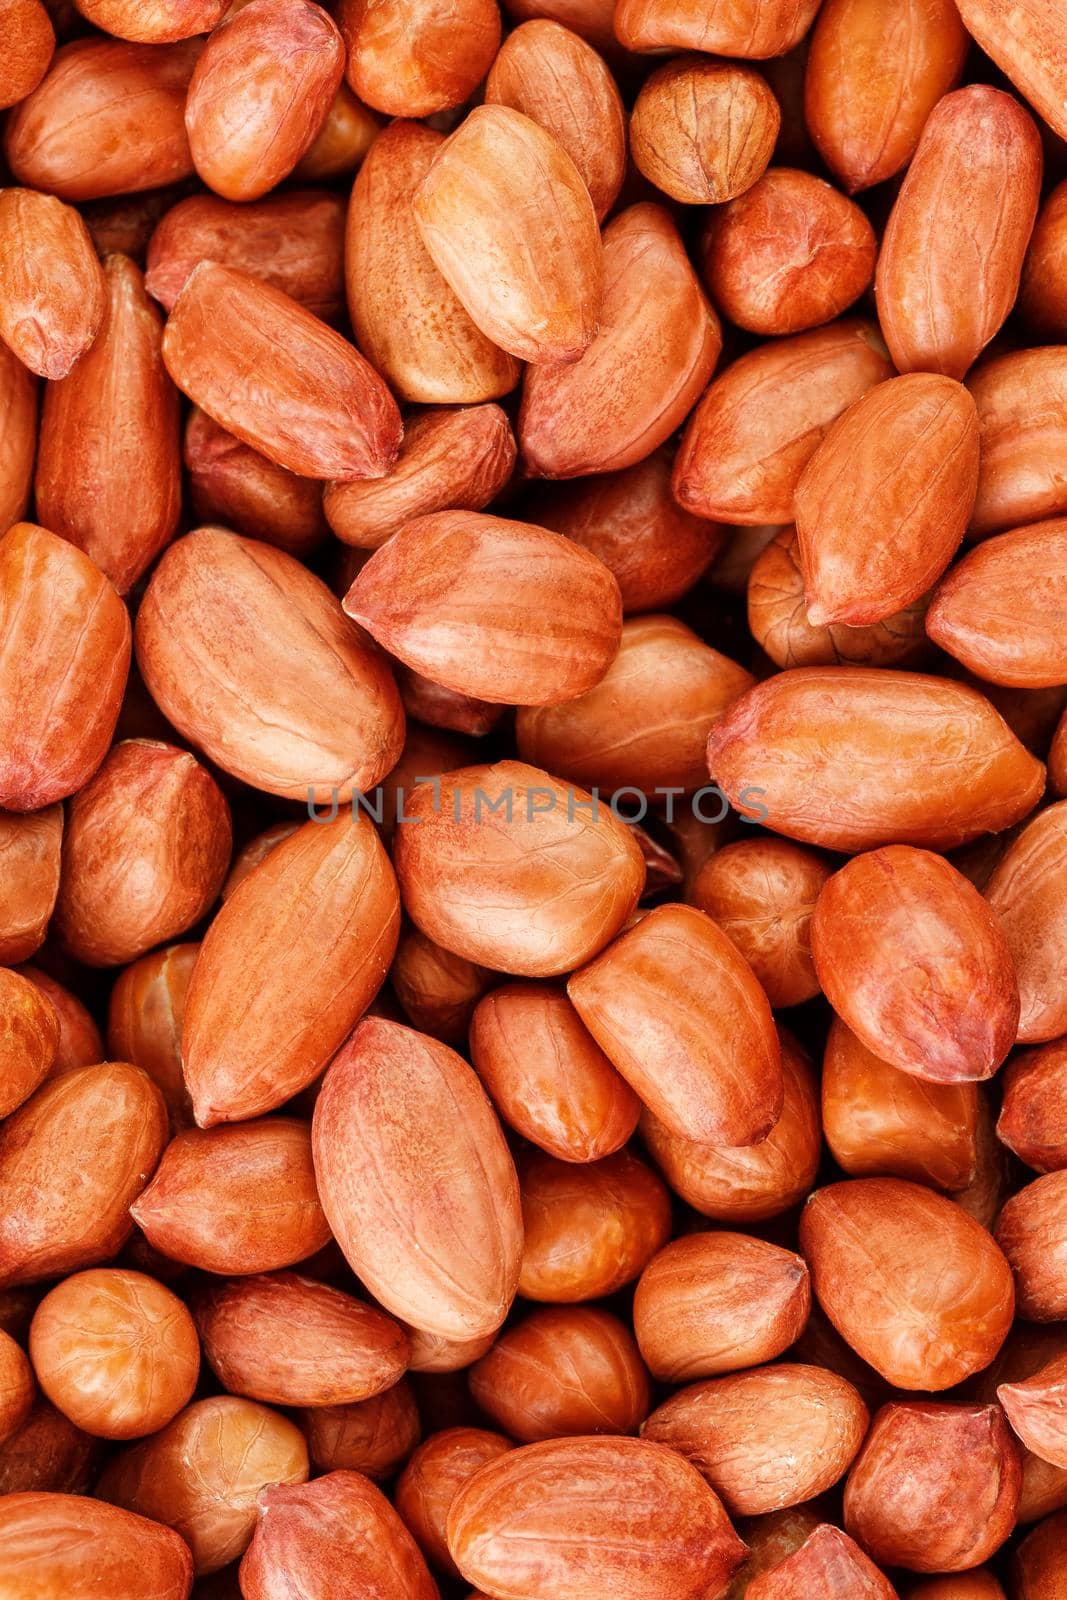 Peanuts, for background or textures, uncleaned inshell peanuts. Peeled peanut on well peanuts